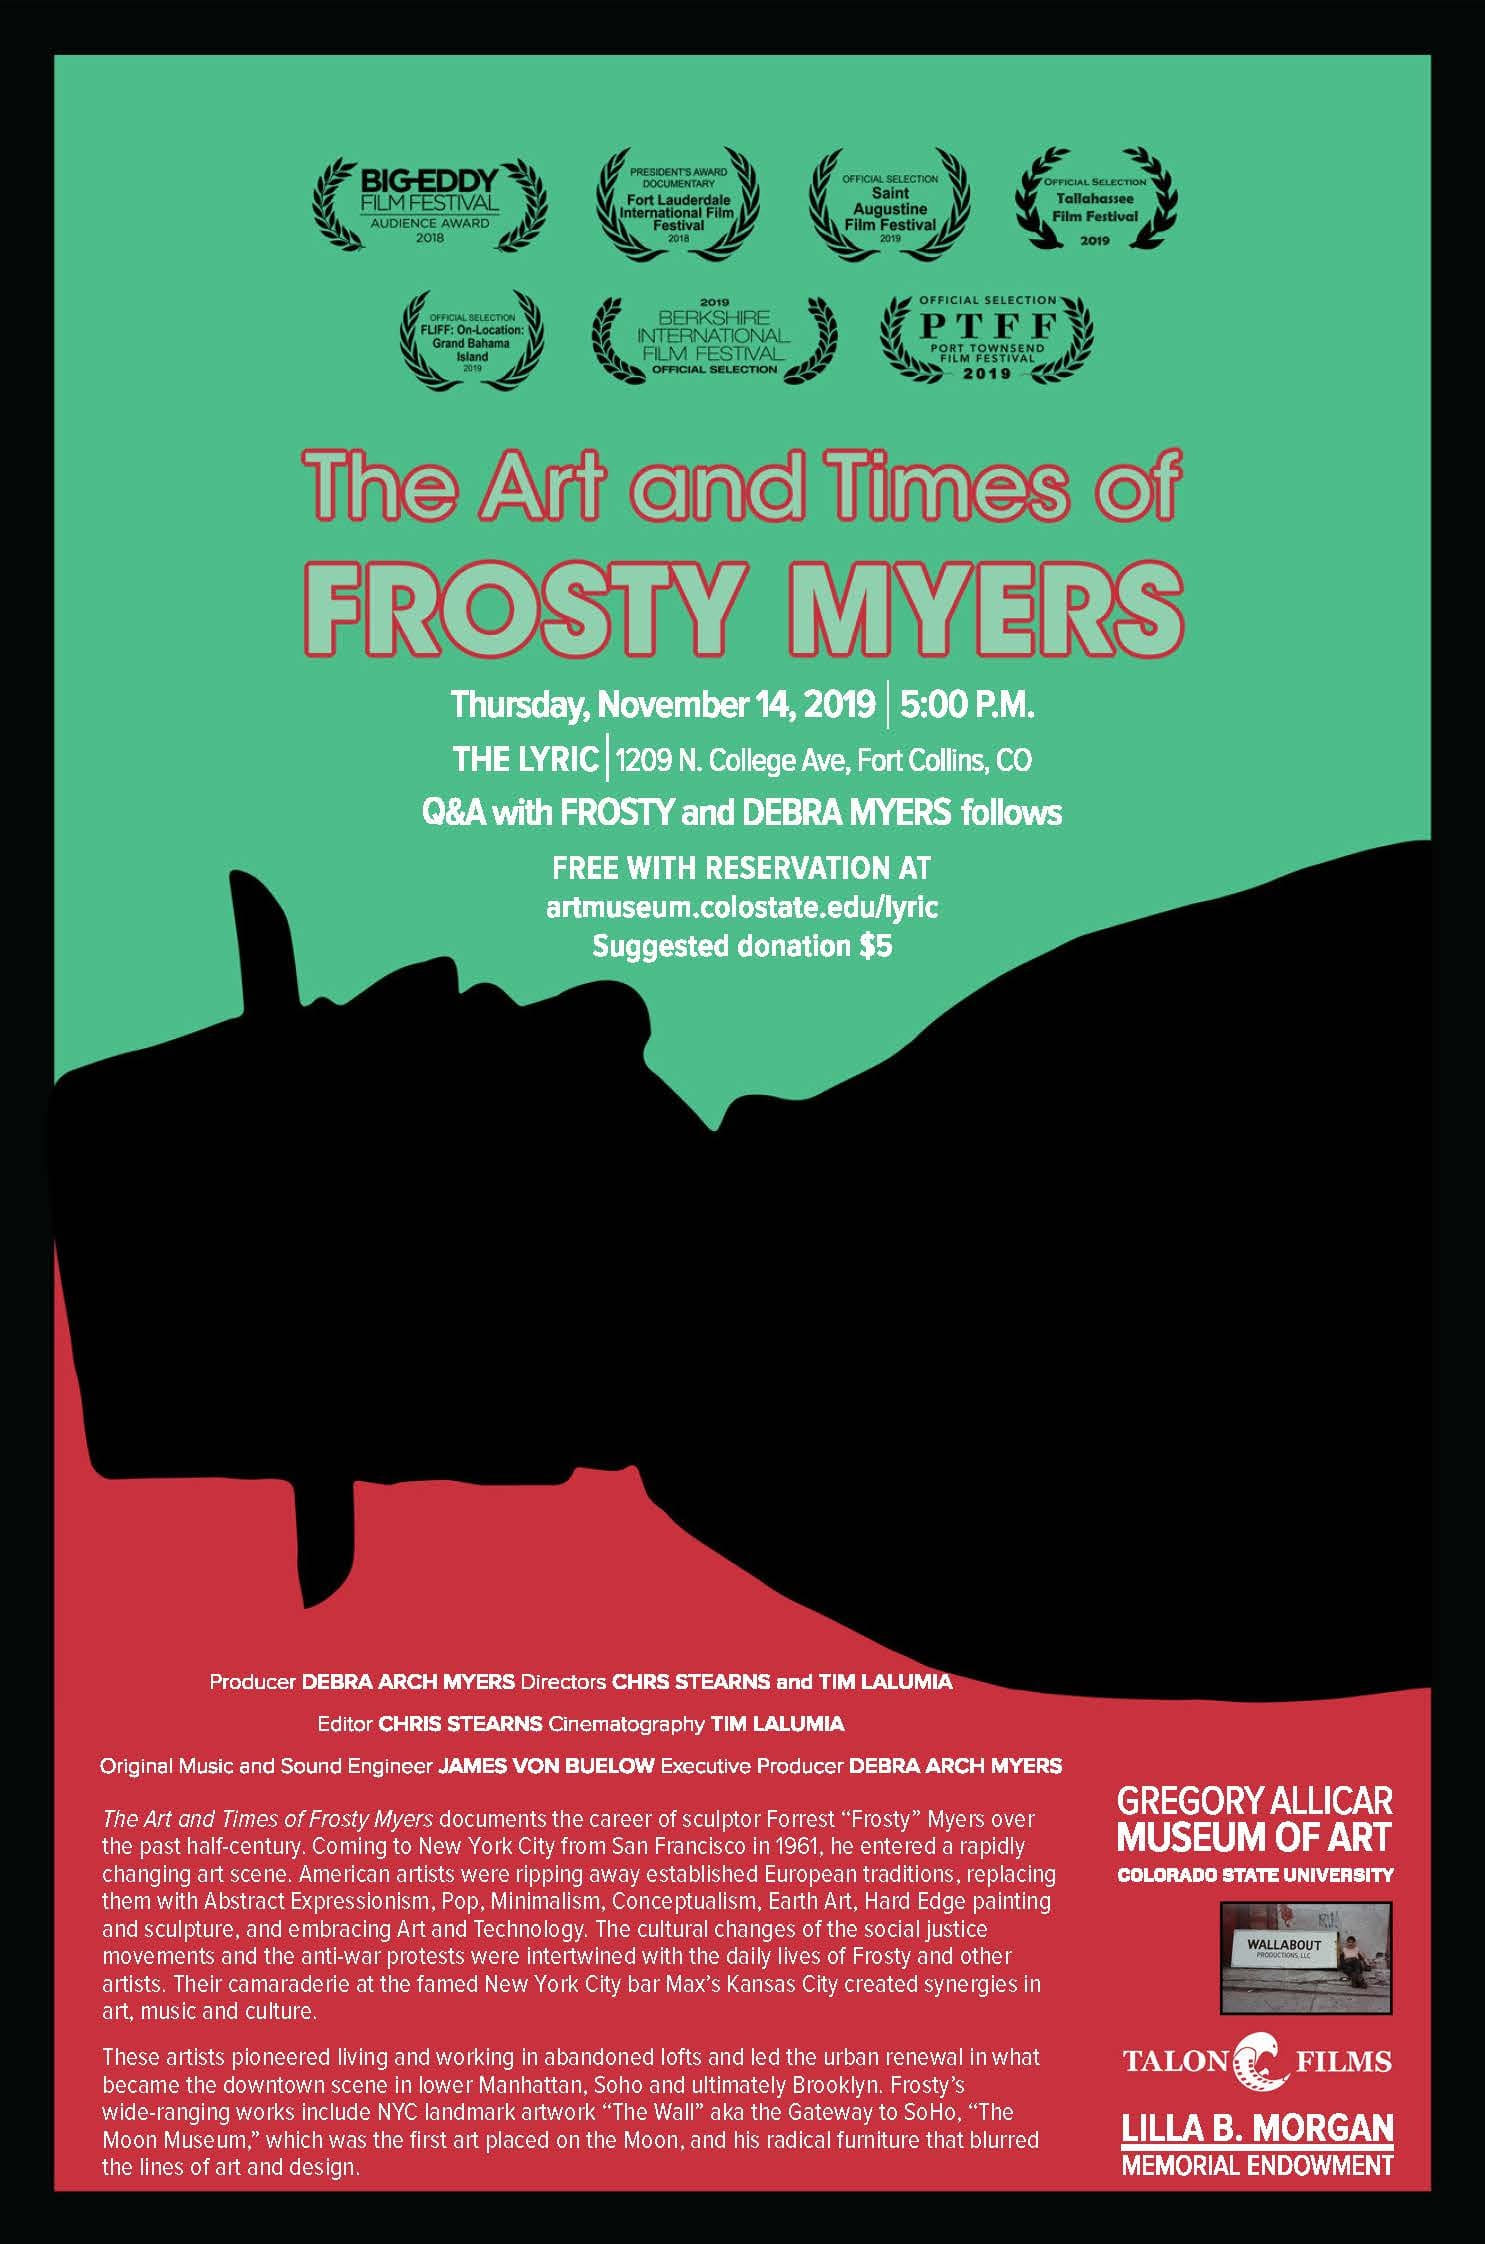 The Art and Times of Frosty Myers